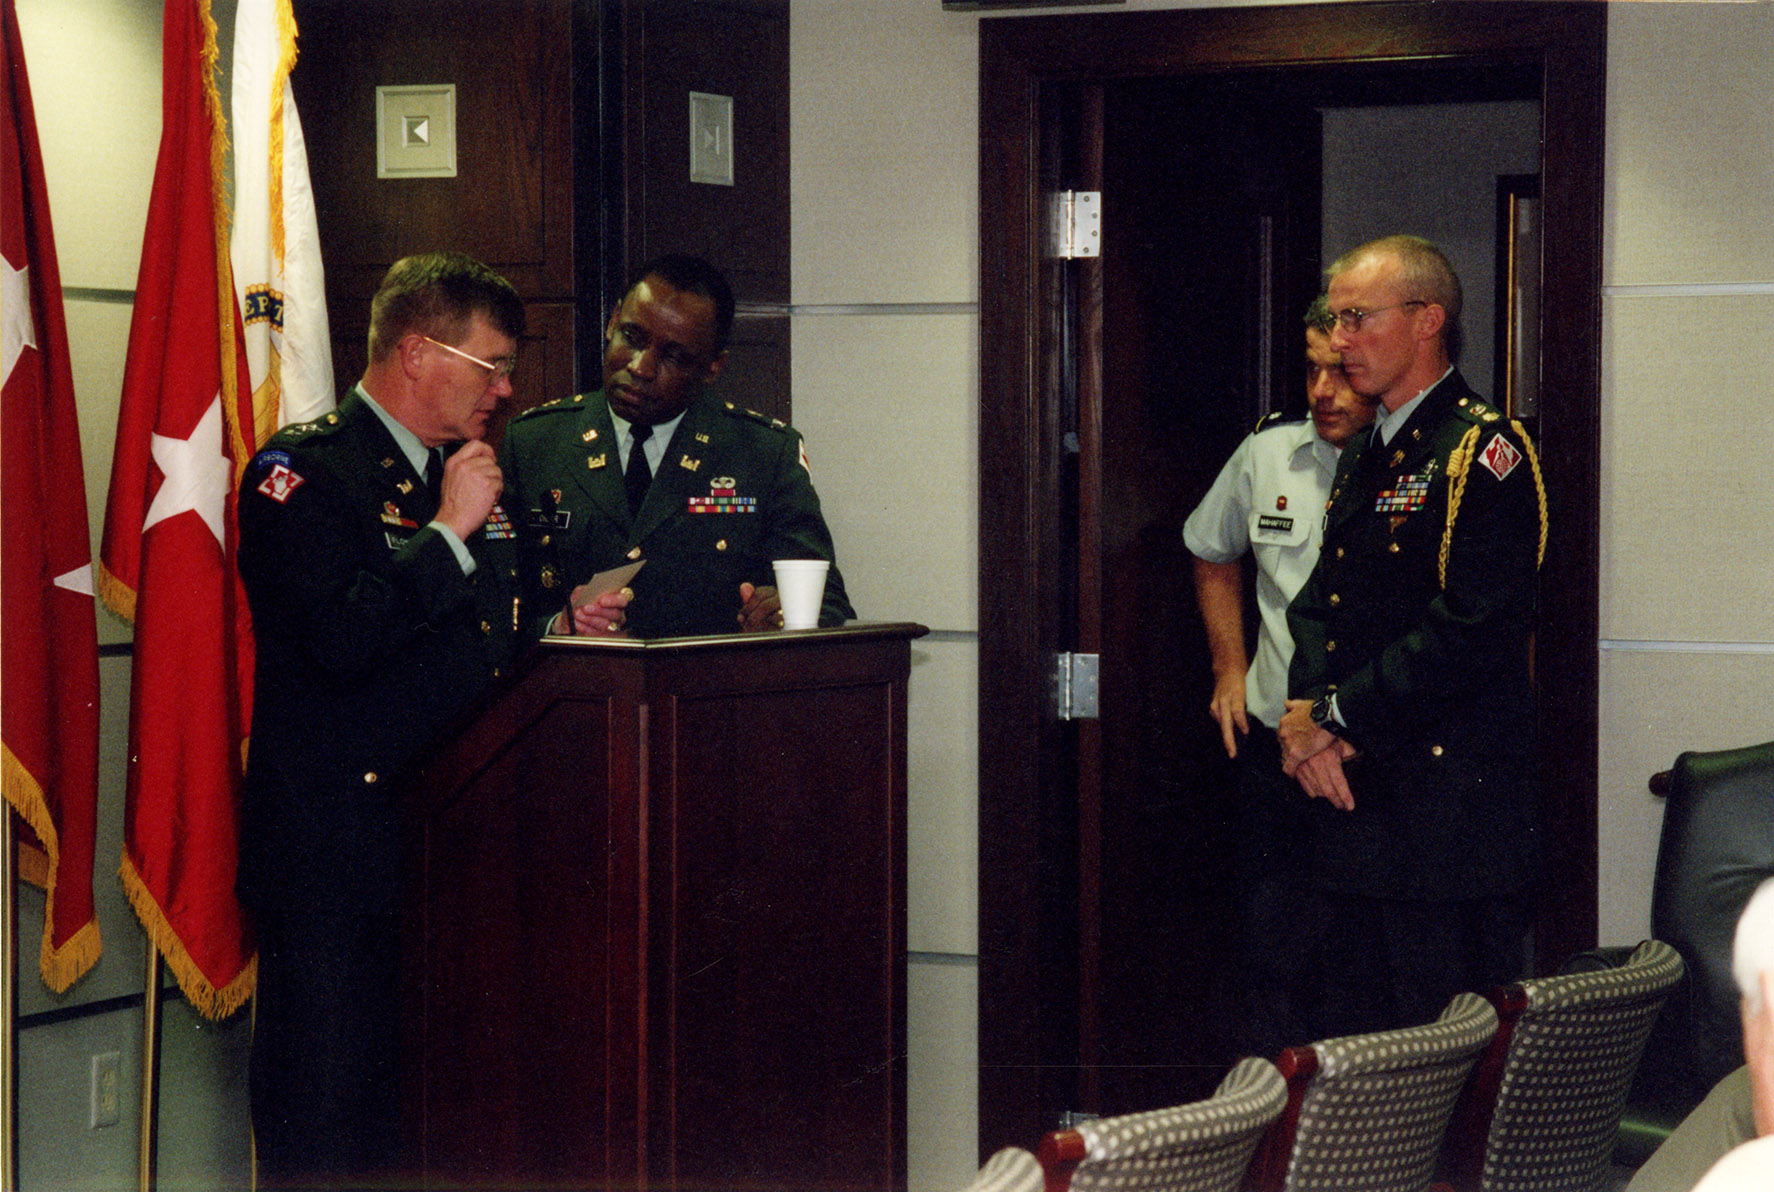 Four men in army uniforms in a meeting room